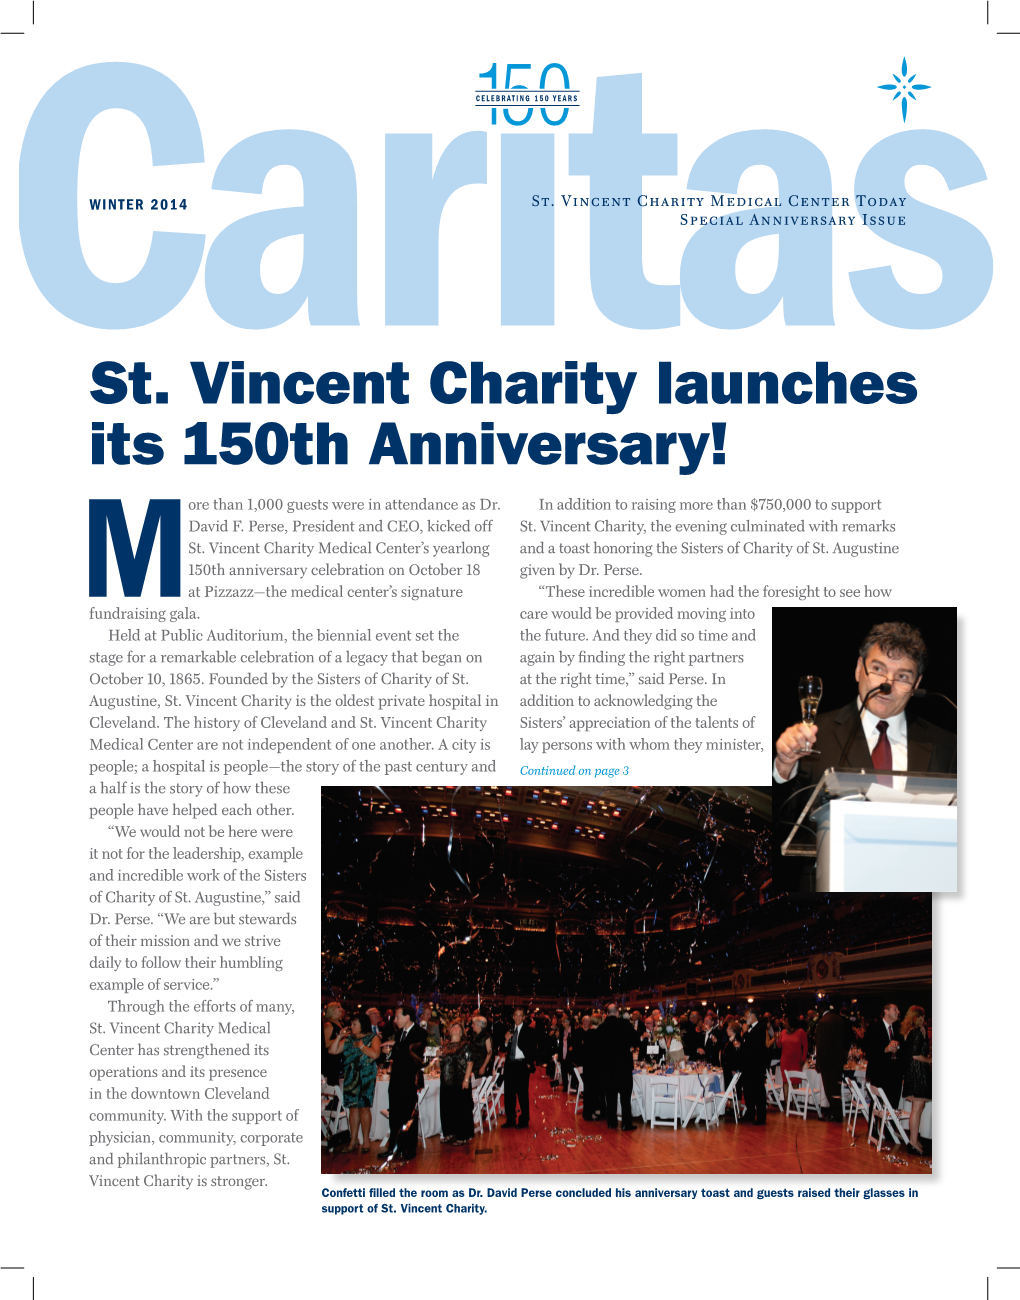 St. Vincent Charity Launches Its 150Th Anniversary!